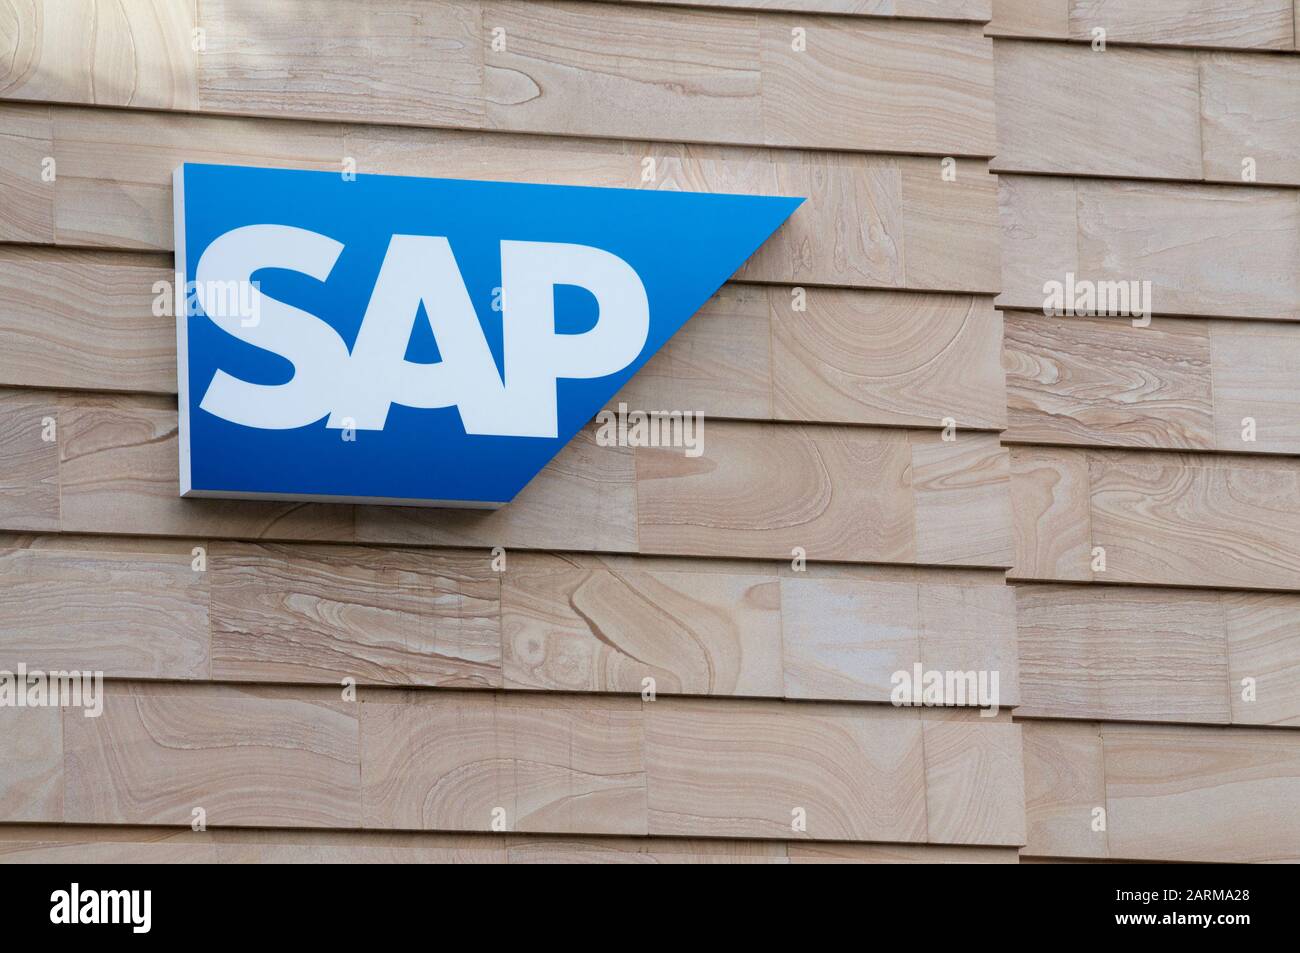 Brisbane, Queensland, Australia - 21st January 2020 : SAP Logo hanging in front of a building facade in Brisbane. SAP is a European multinational soft Stock Photo